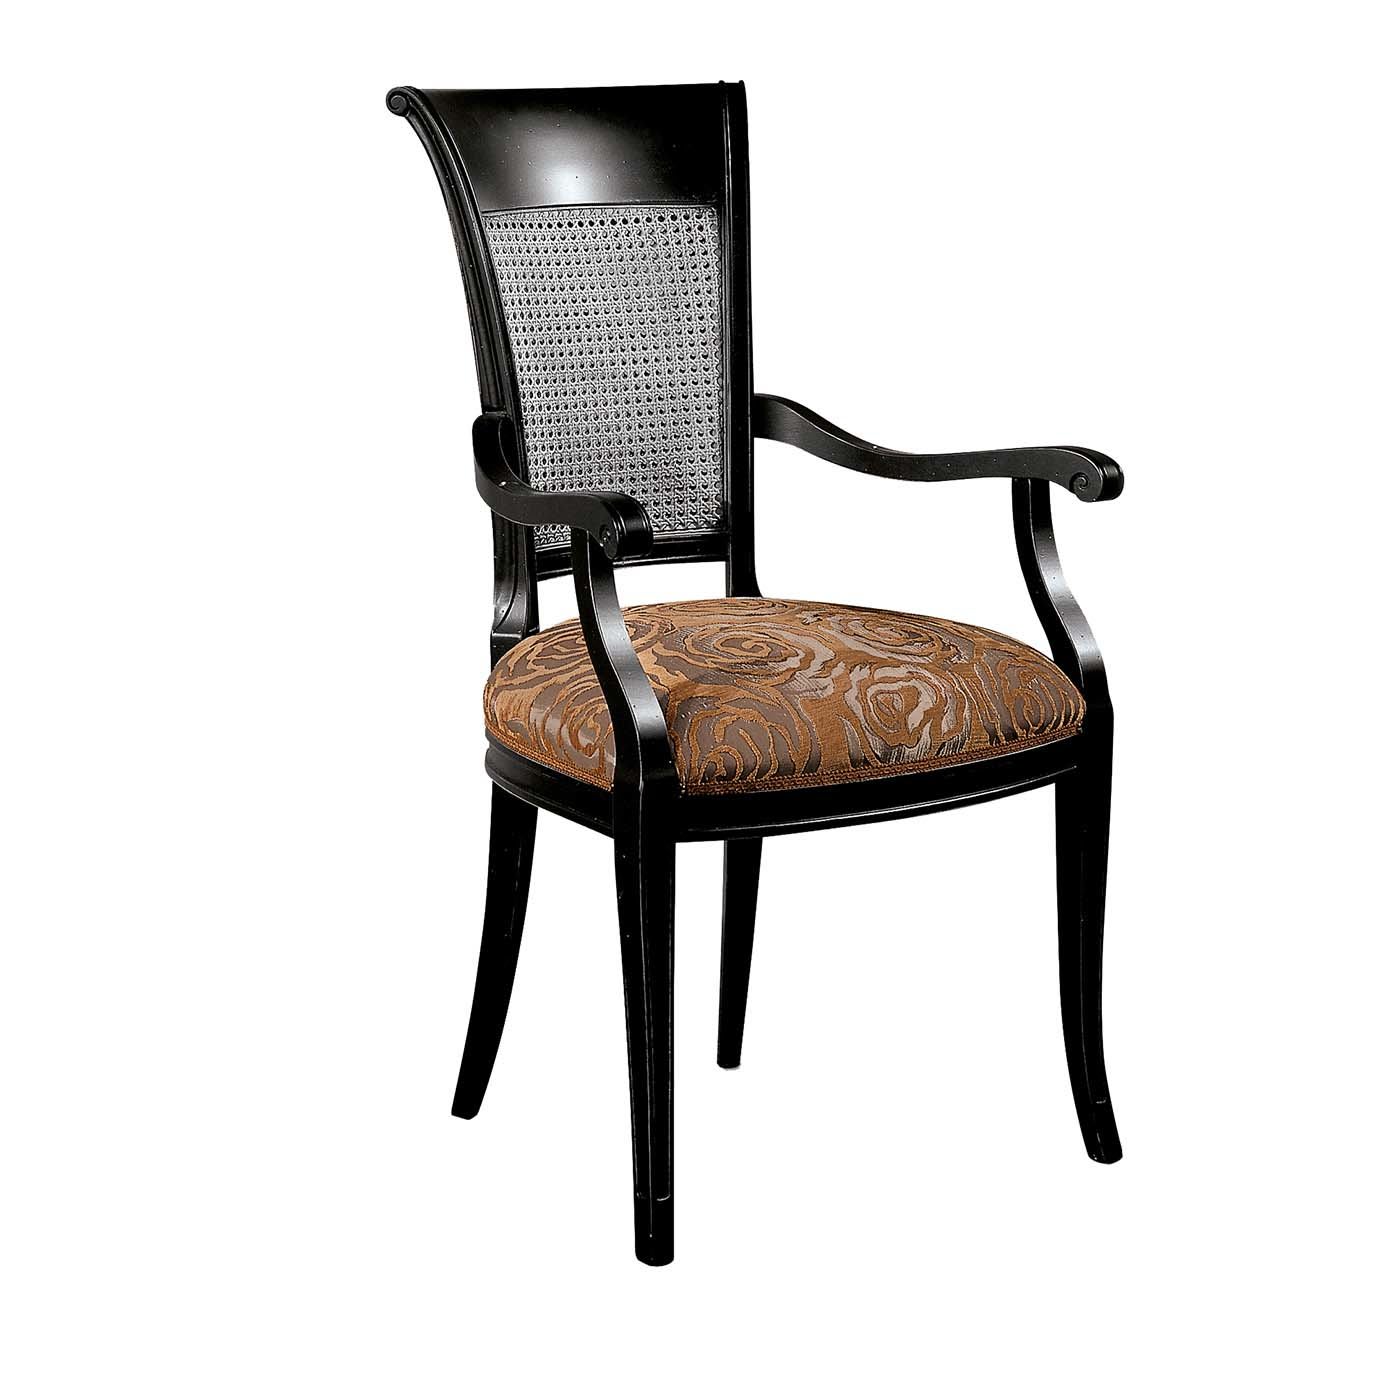 Capotavola Viennese Cane Chair with Armrests - Modenese Gastone